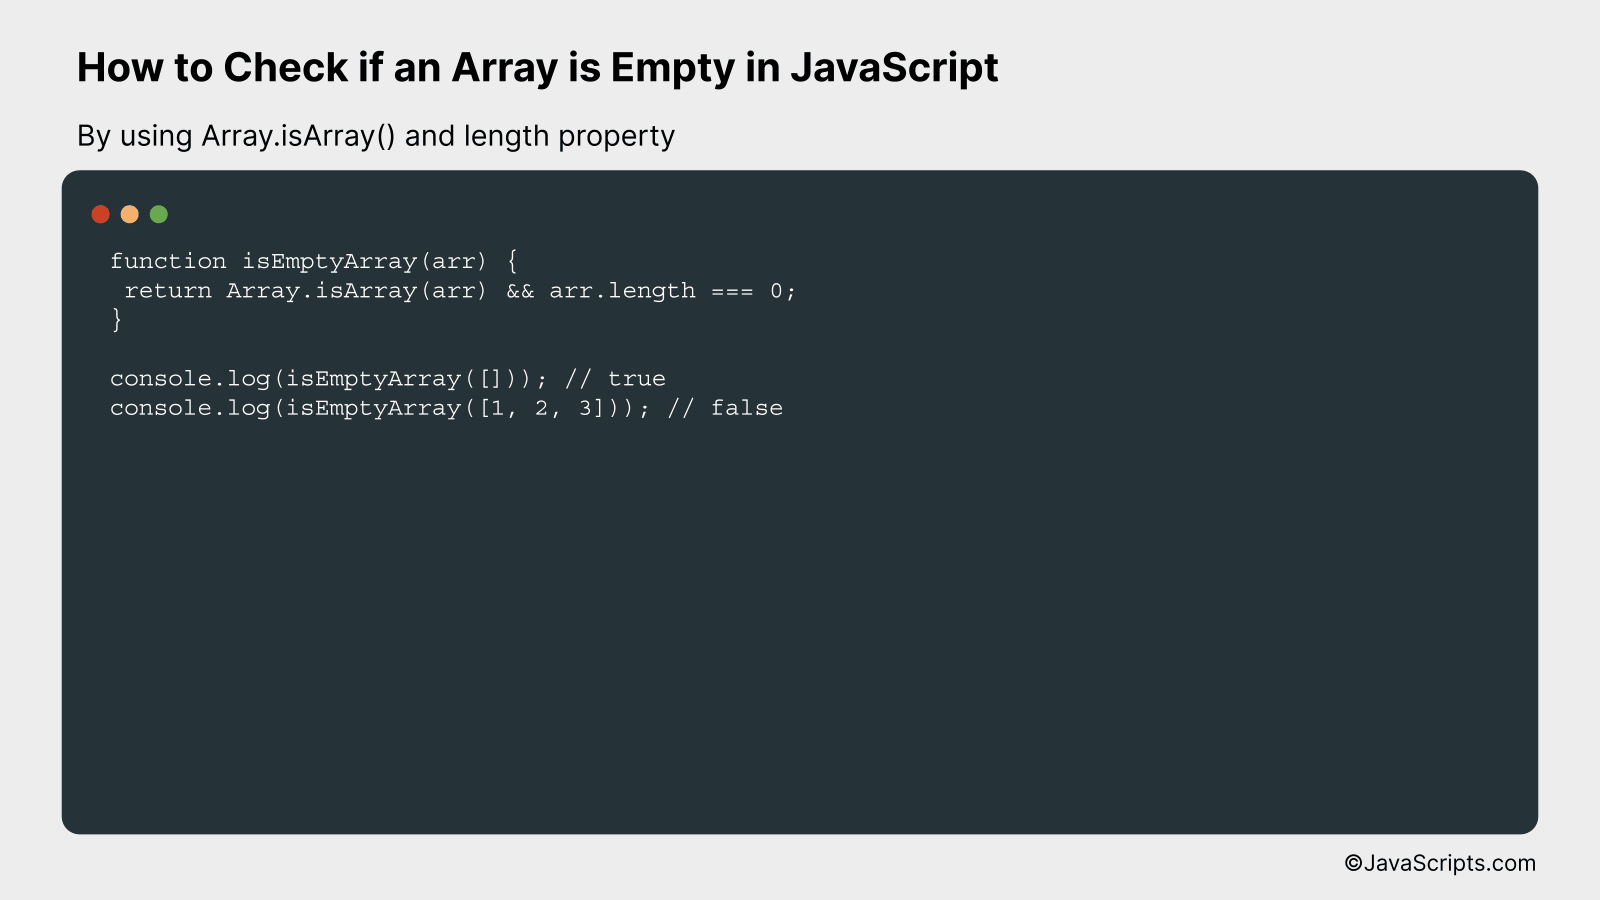 By using Array.isArray() and length property